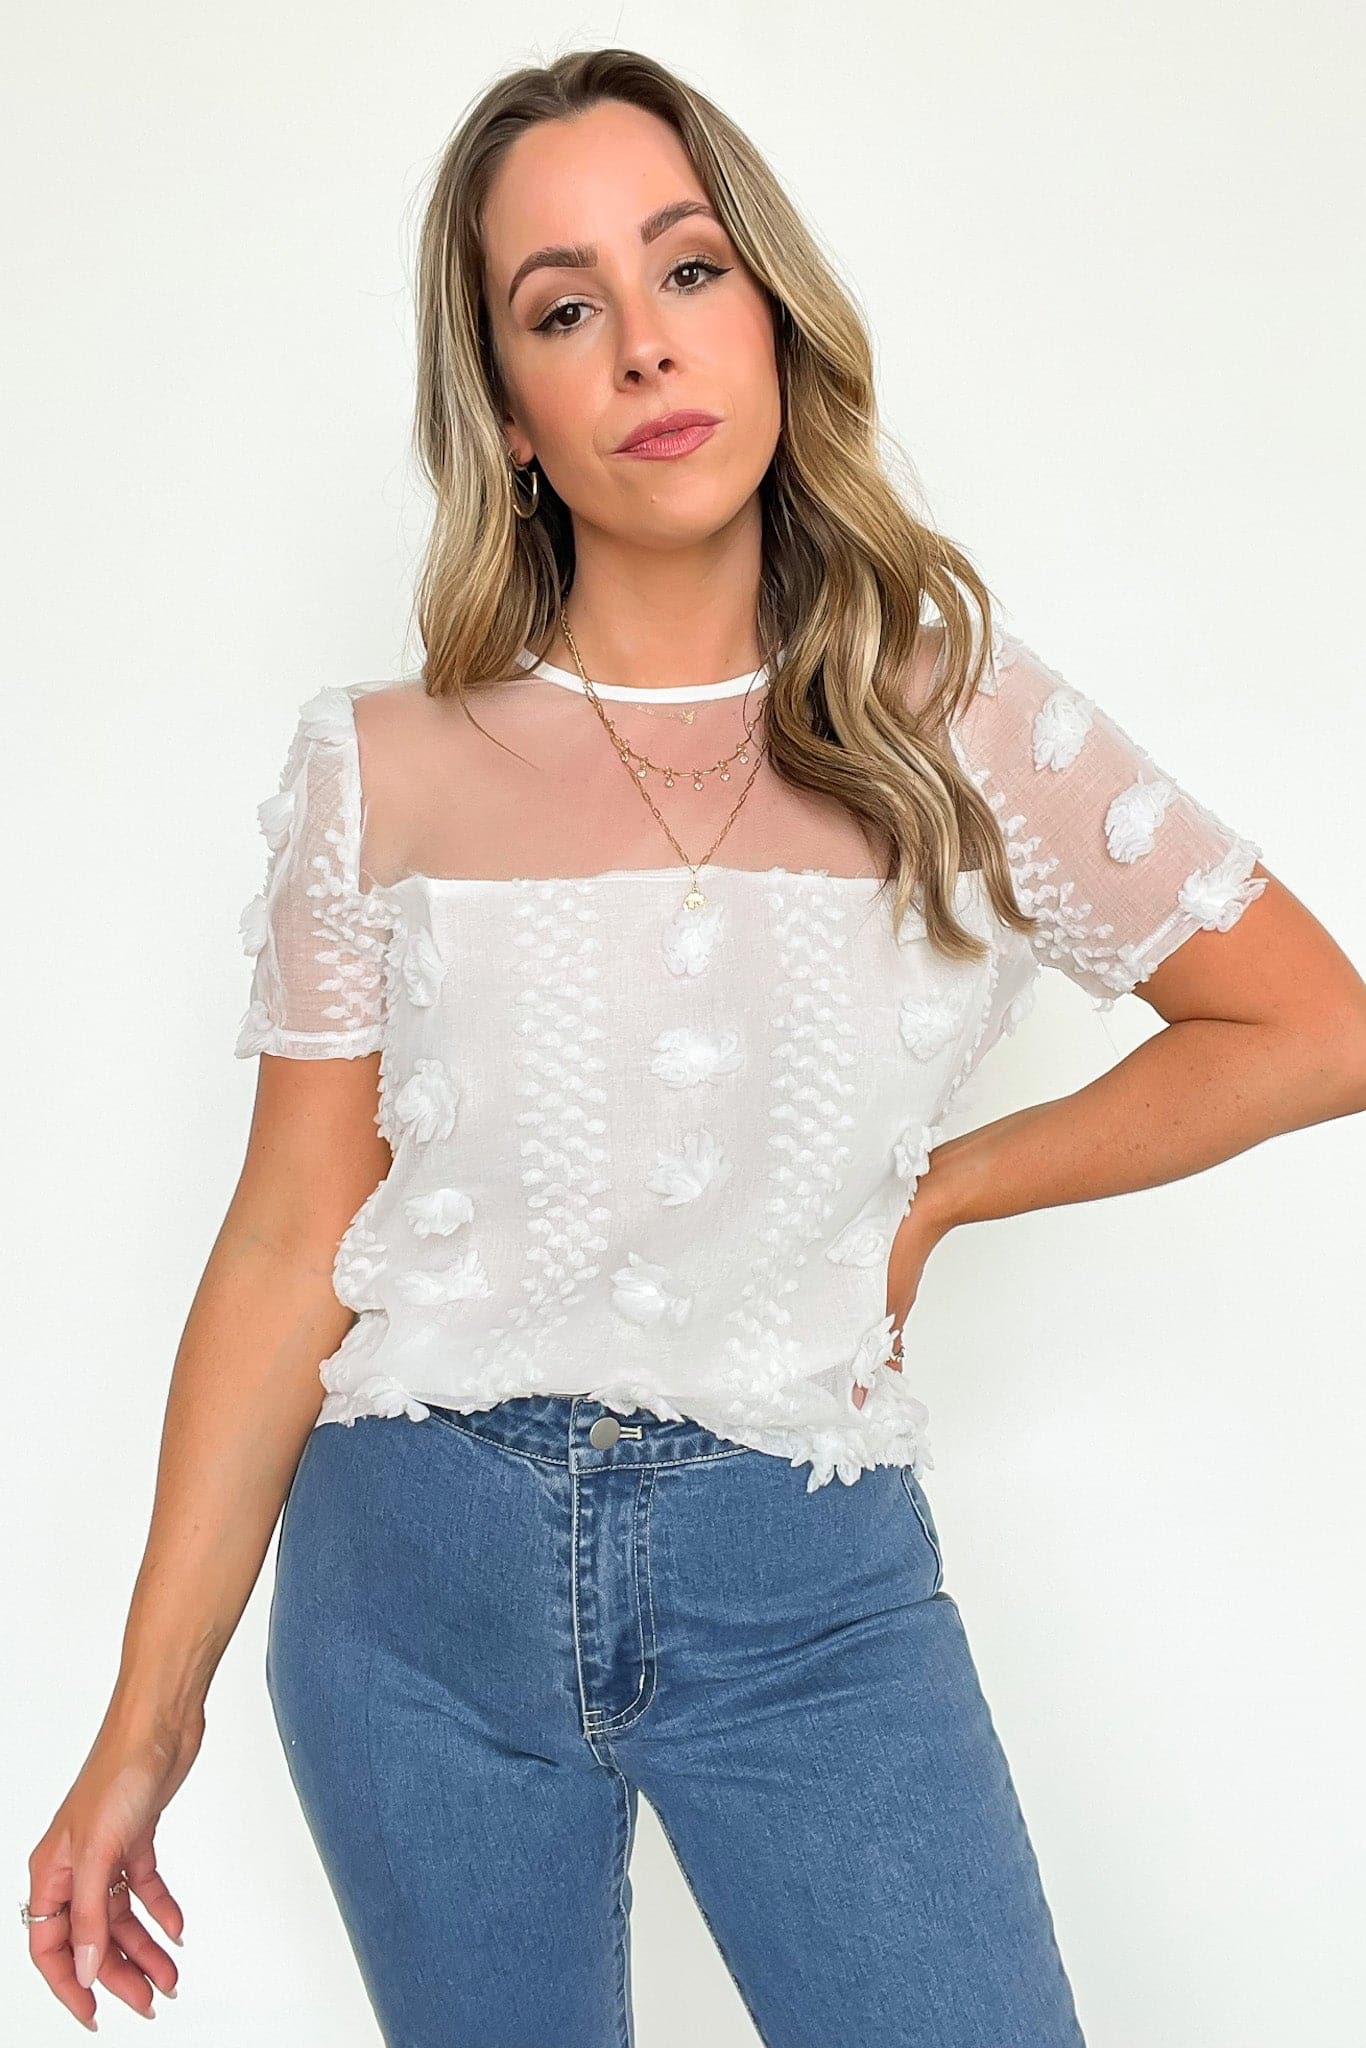  Idyllic Perfection Sheer Pom Pom Detail Top - FINAL SALE - Madison and Mallory